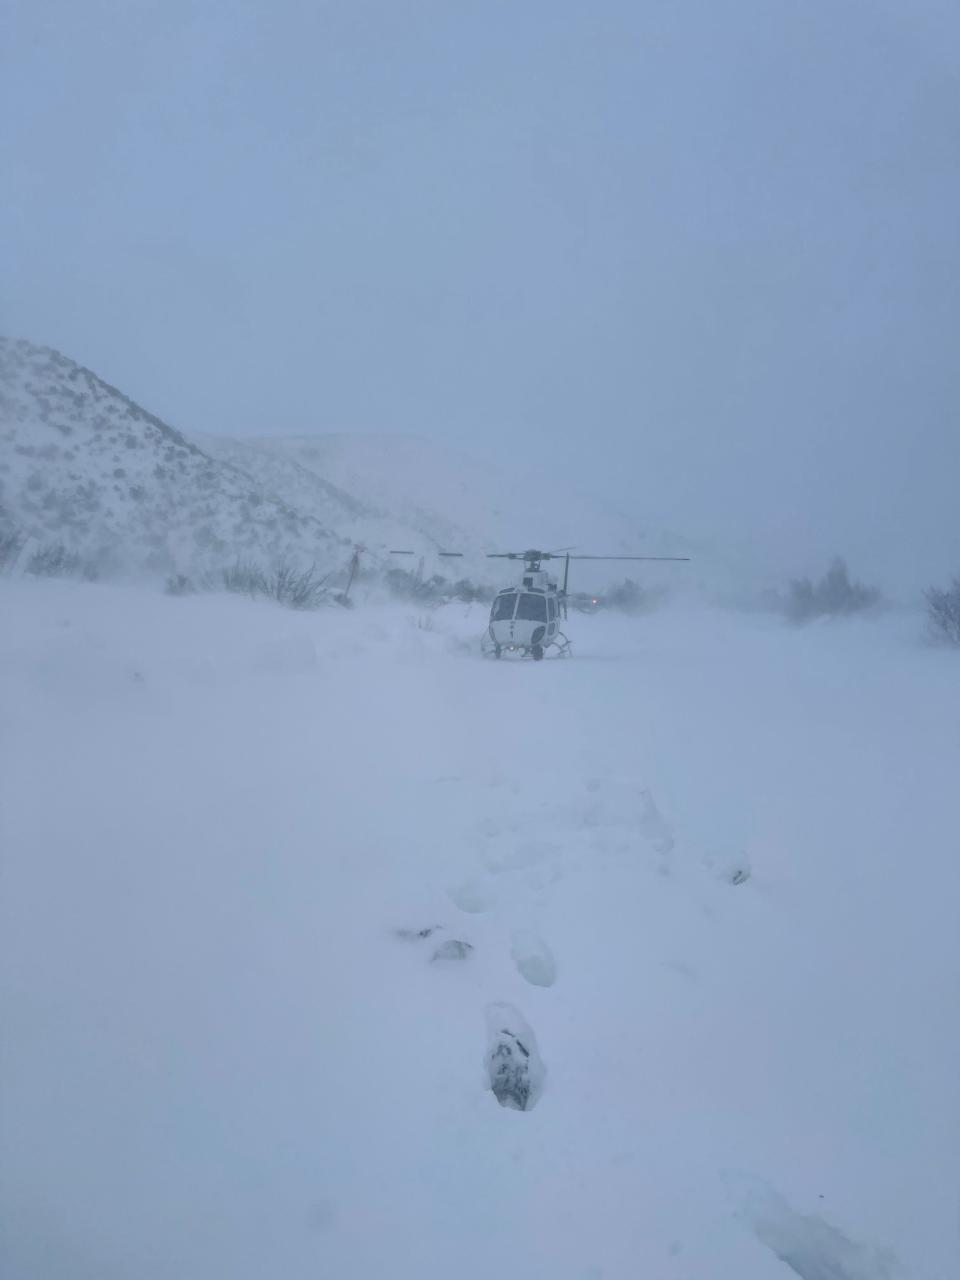 A sheriff’s aviation crew recently rescued Brandon Henson, 31, of Mission Viejo after his vehicle became stuck in deep snow in the Lytle Creek area of the San Gabriel Mountains.